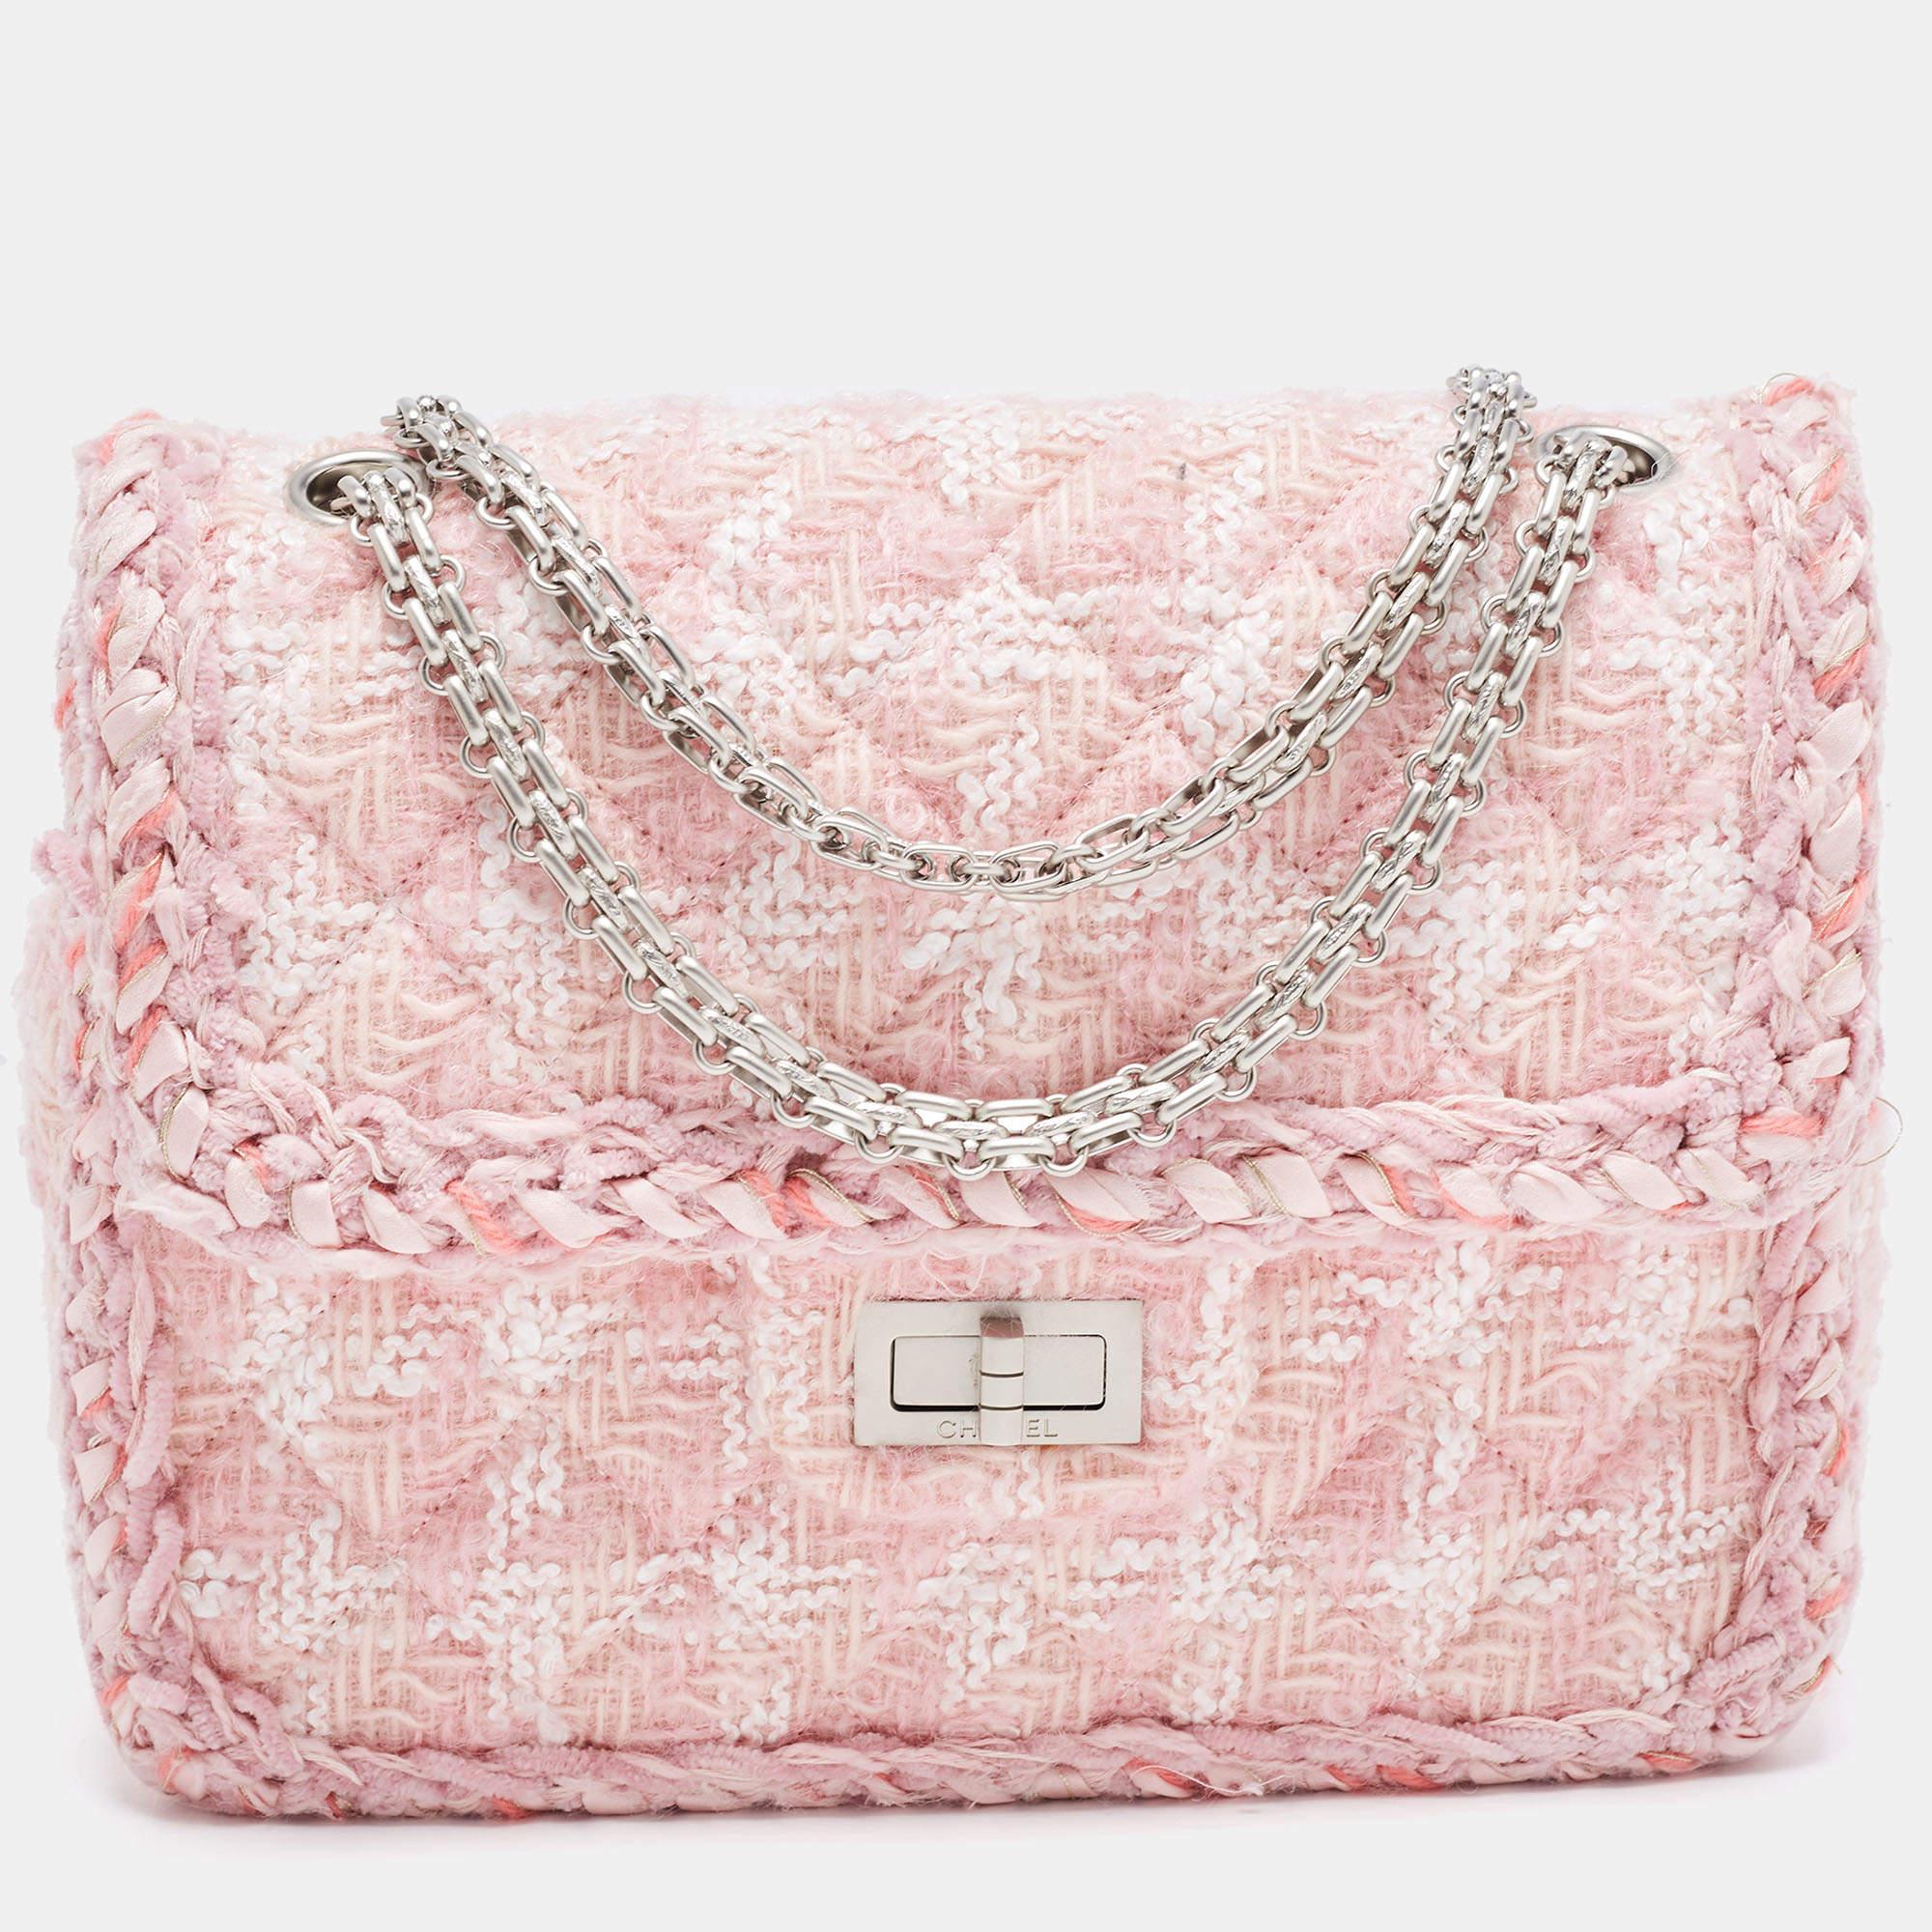 Women's Chanel Pink Quilted Tweed Square Reissue 2.55 Flap Bag